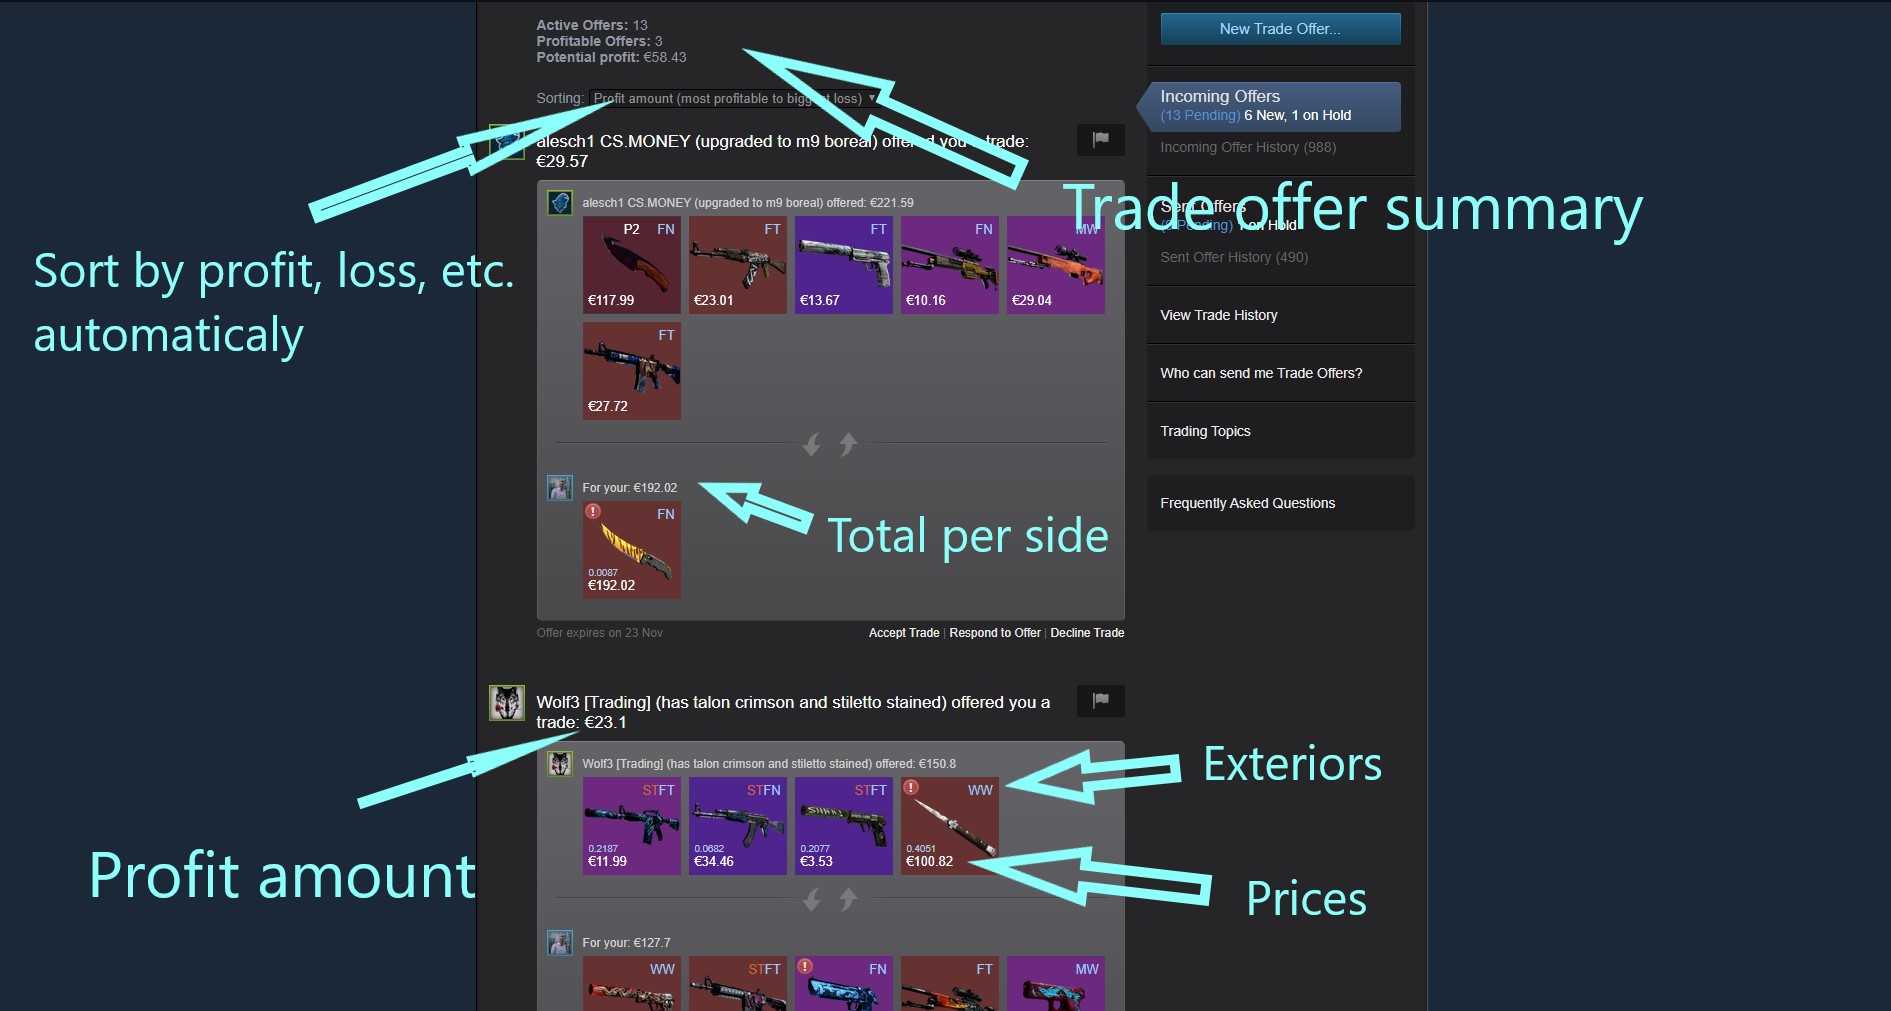 Incoming offers features